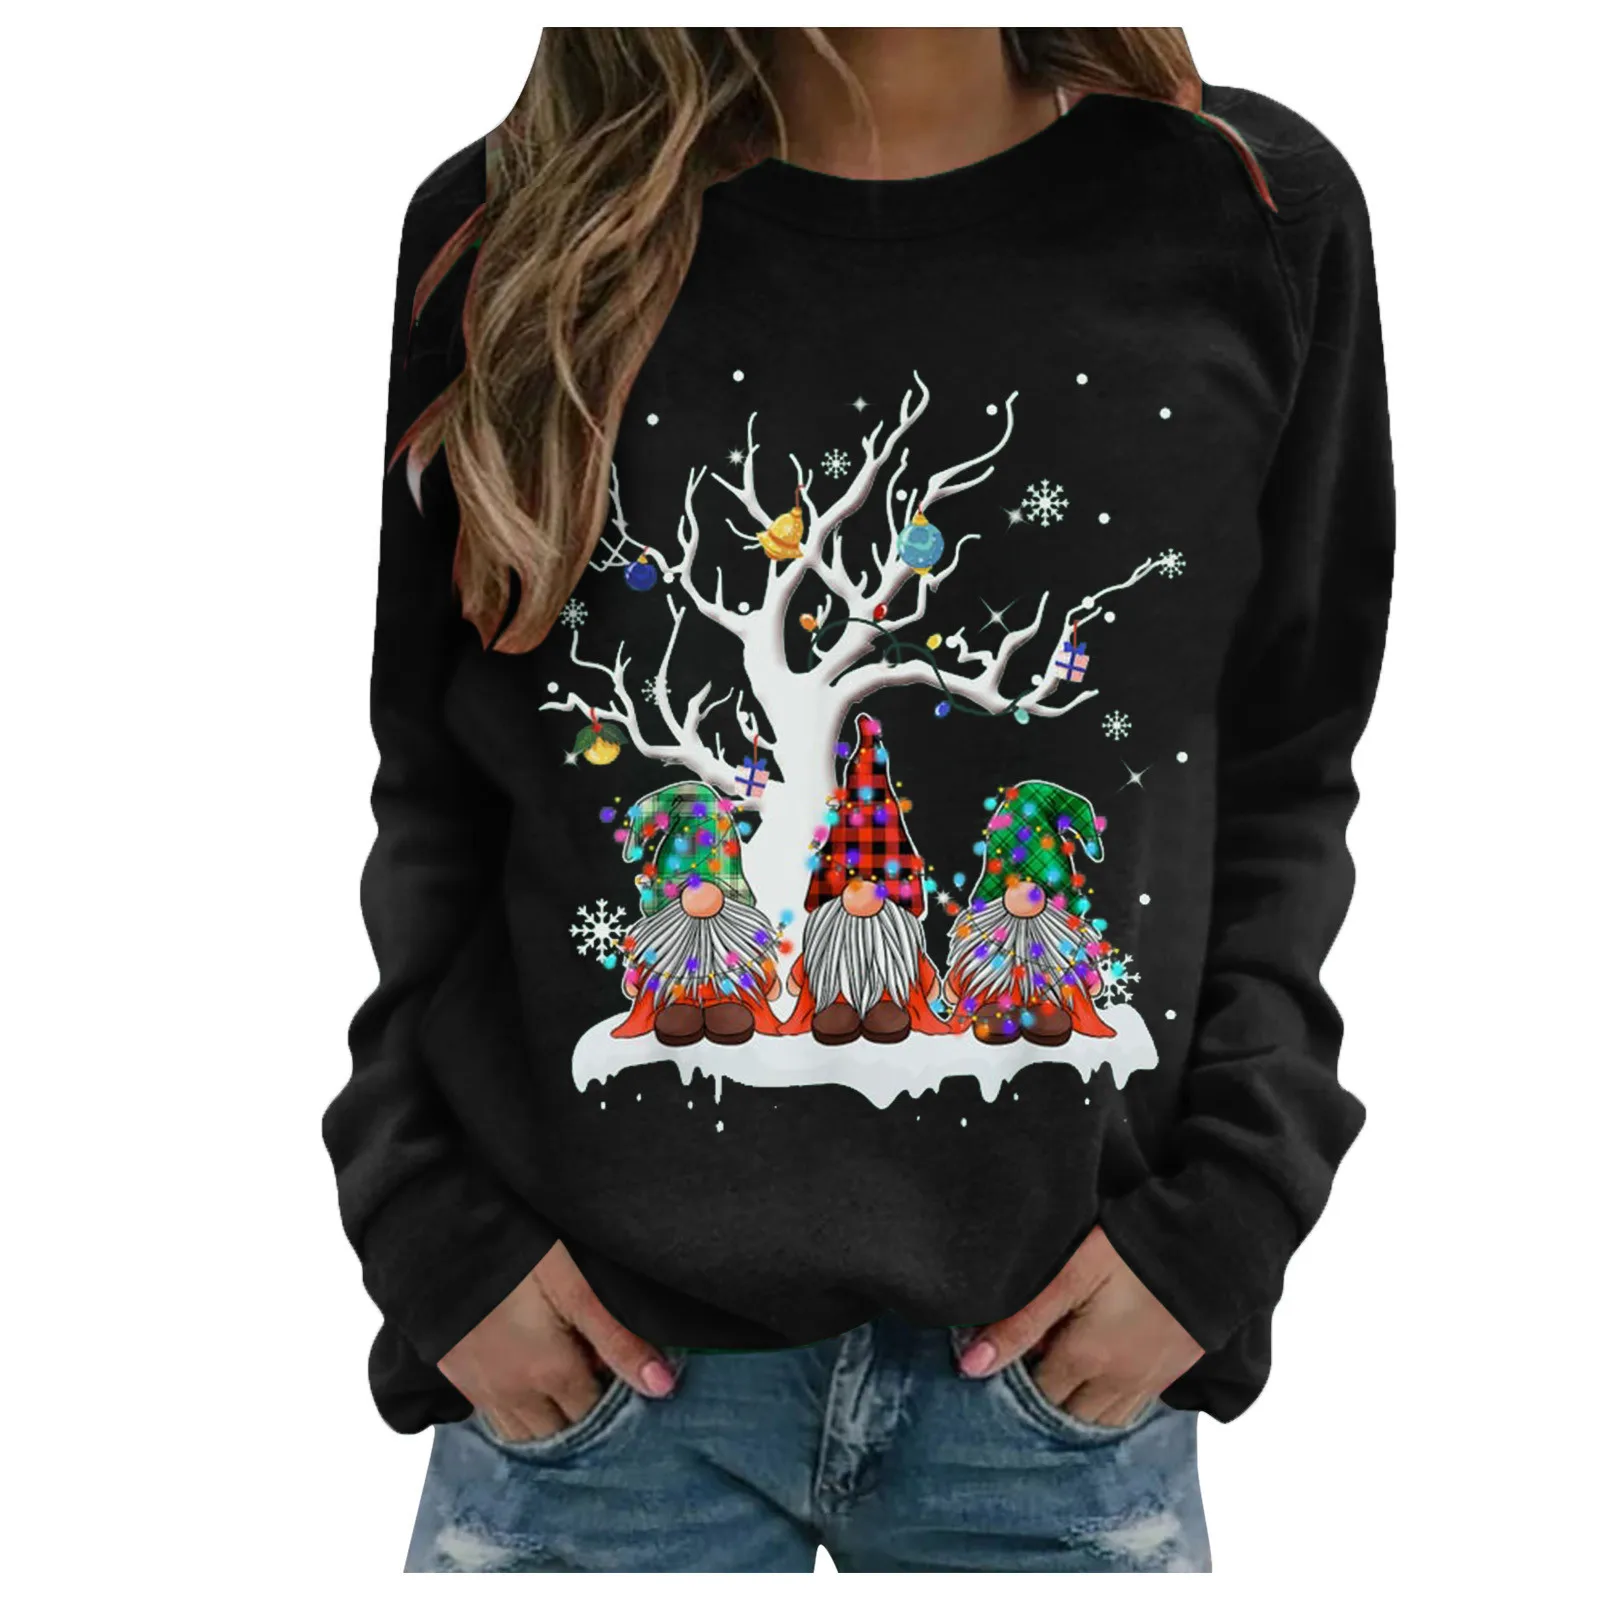 Christmas Women Printed Sweatshirt for leisure, party, Street wear, daily wear, makes you charming and fashionable